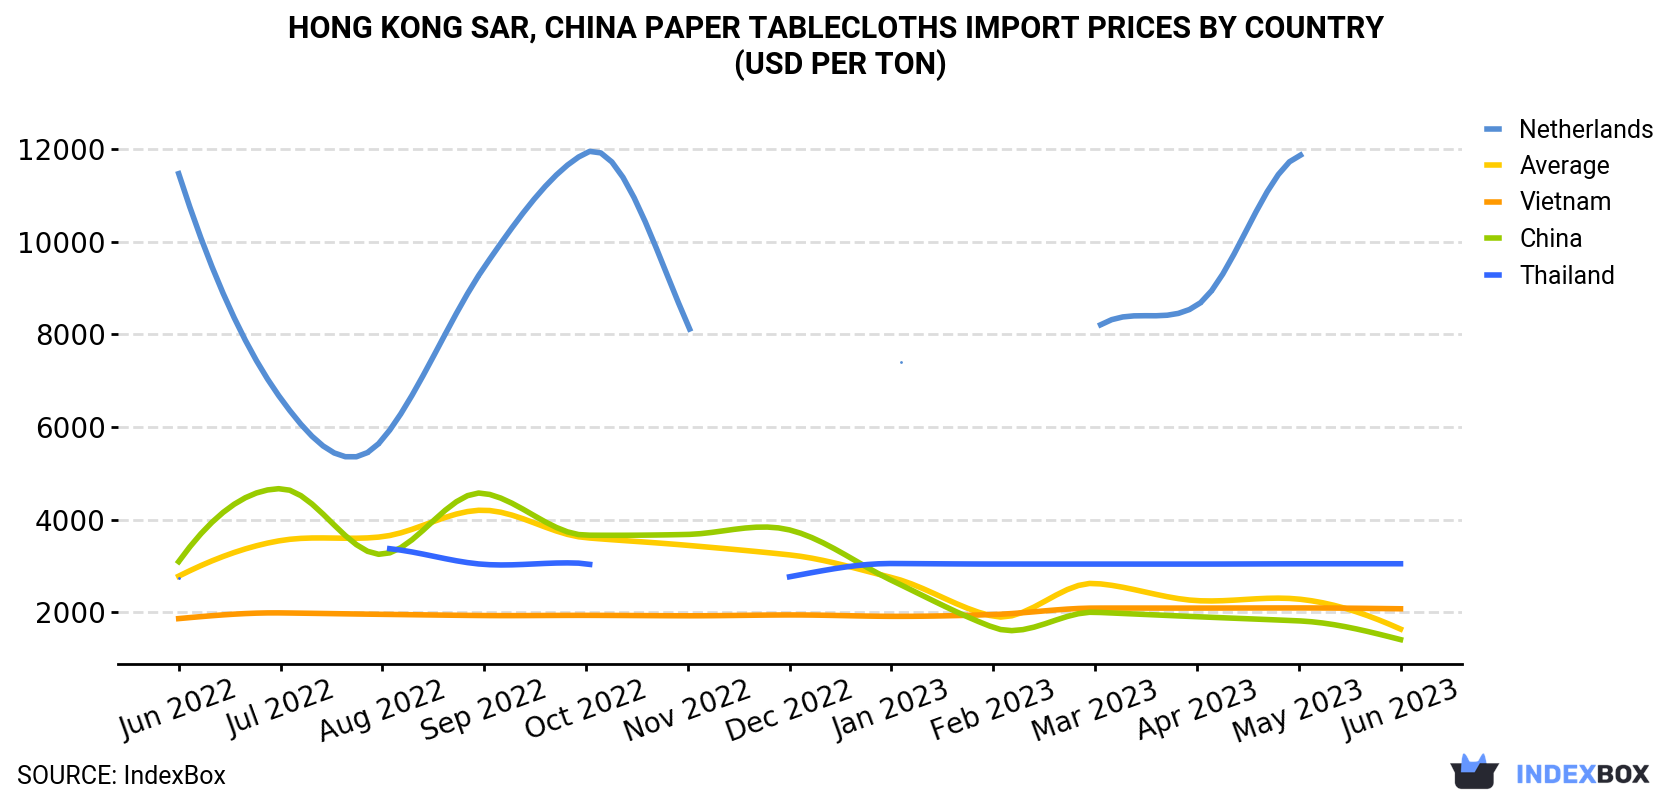 Hong Kong Paper Tablecloths Import Prices By Country (USD Per Ton)